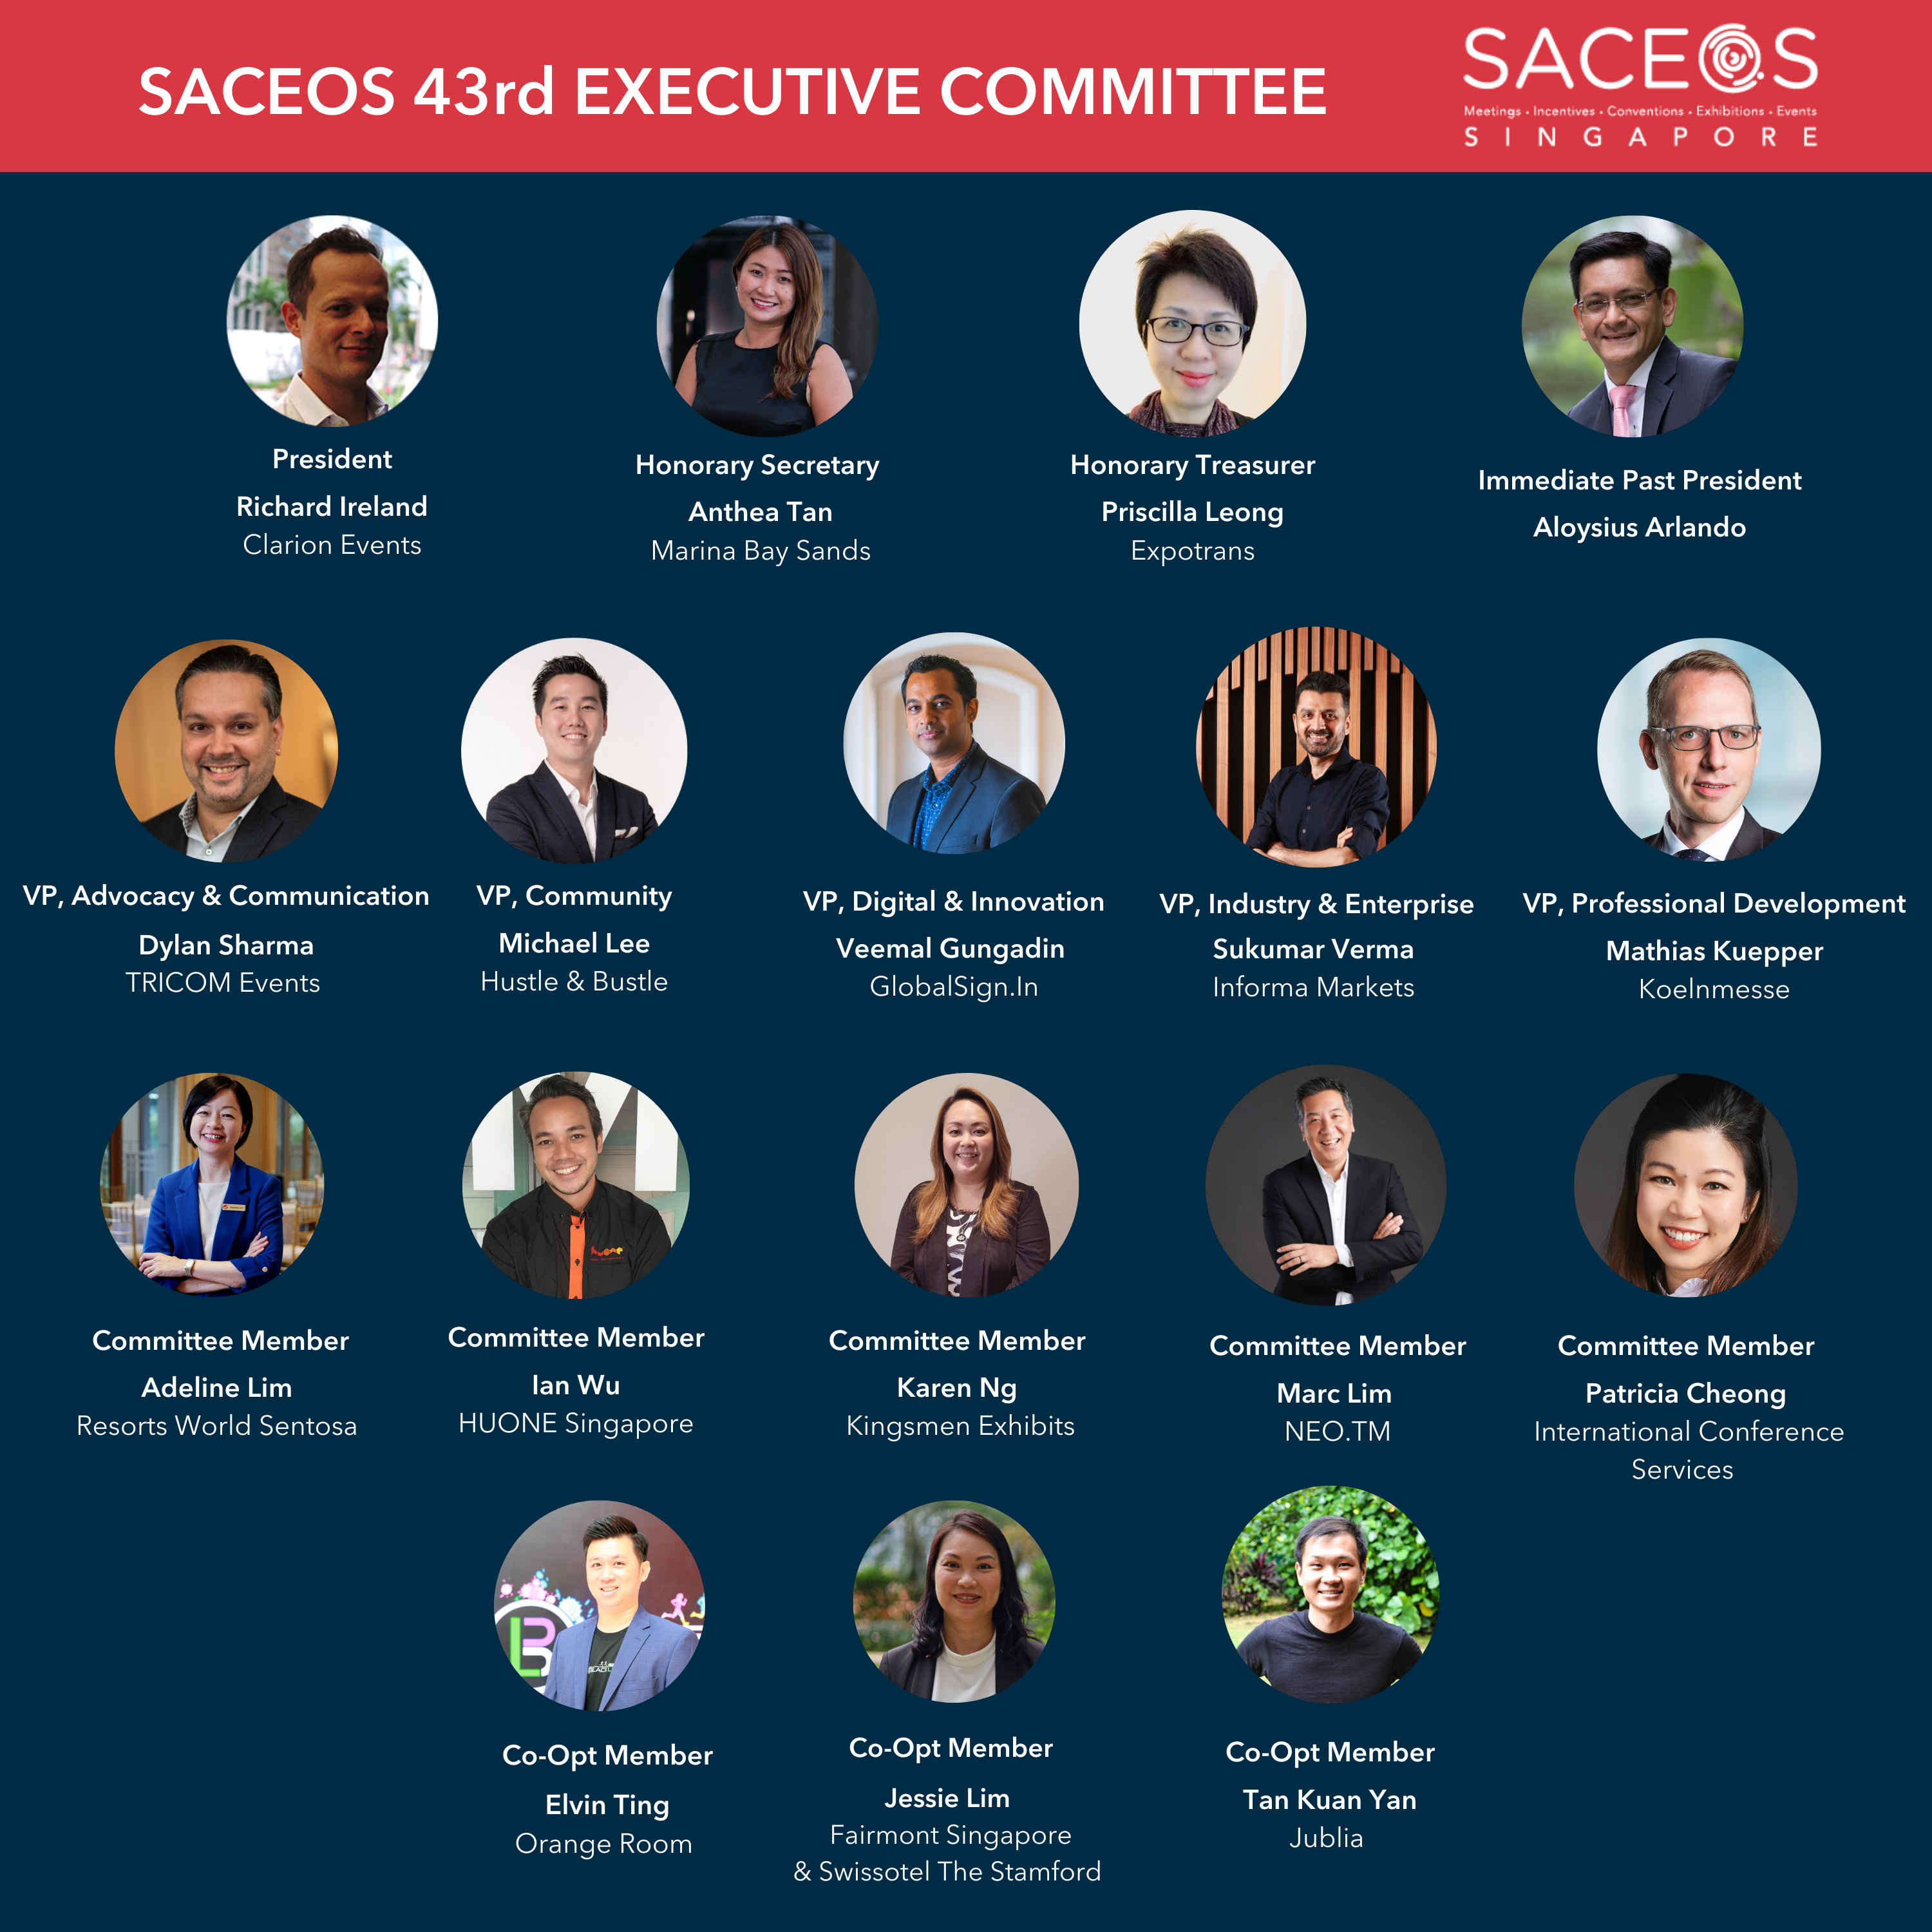 Welcoming SACEOS 43rd Executive Committee